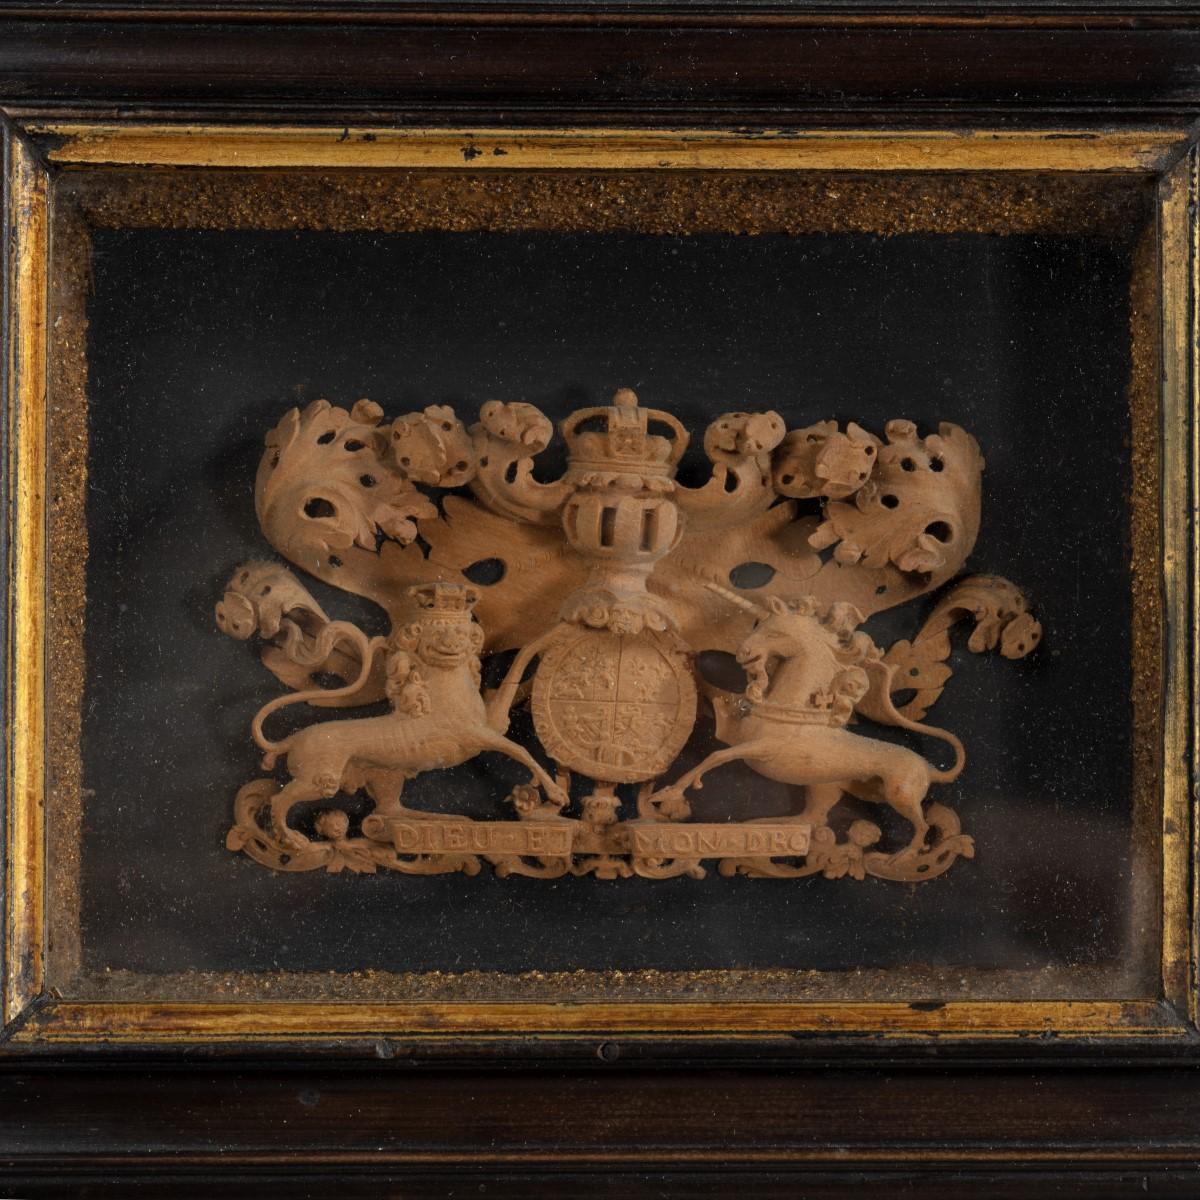 A miniature coat of arms for the Kingdom of Great Britain, 1714-1800, carved for the stern of a ship’s model from limewood or boxwood, in a deep, lined frame with a gilt border.  English, circa 1760.